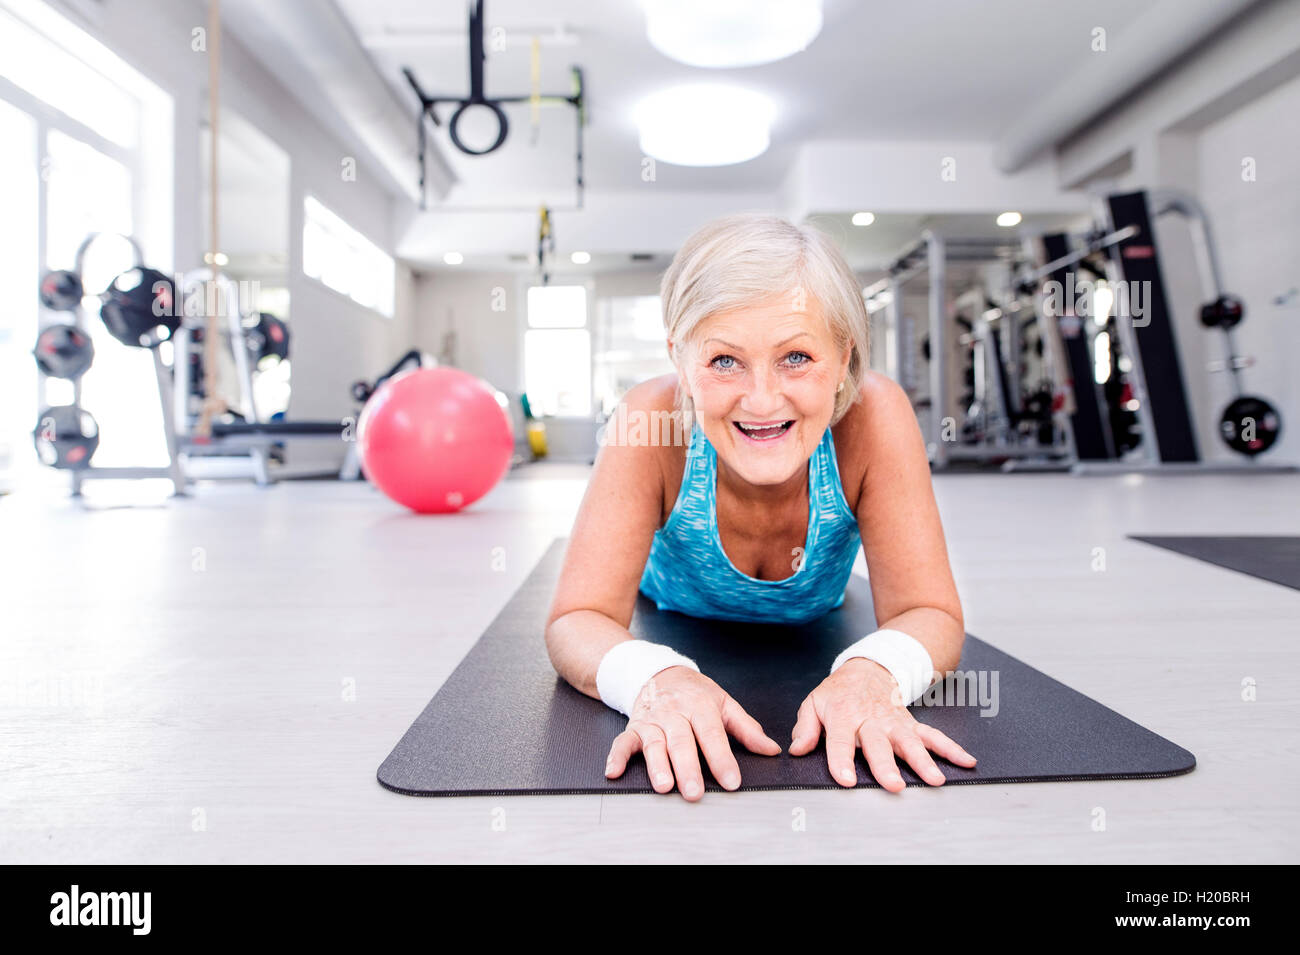 Smiling mature woman lifting up fitness ball in gym